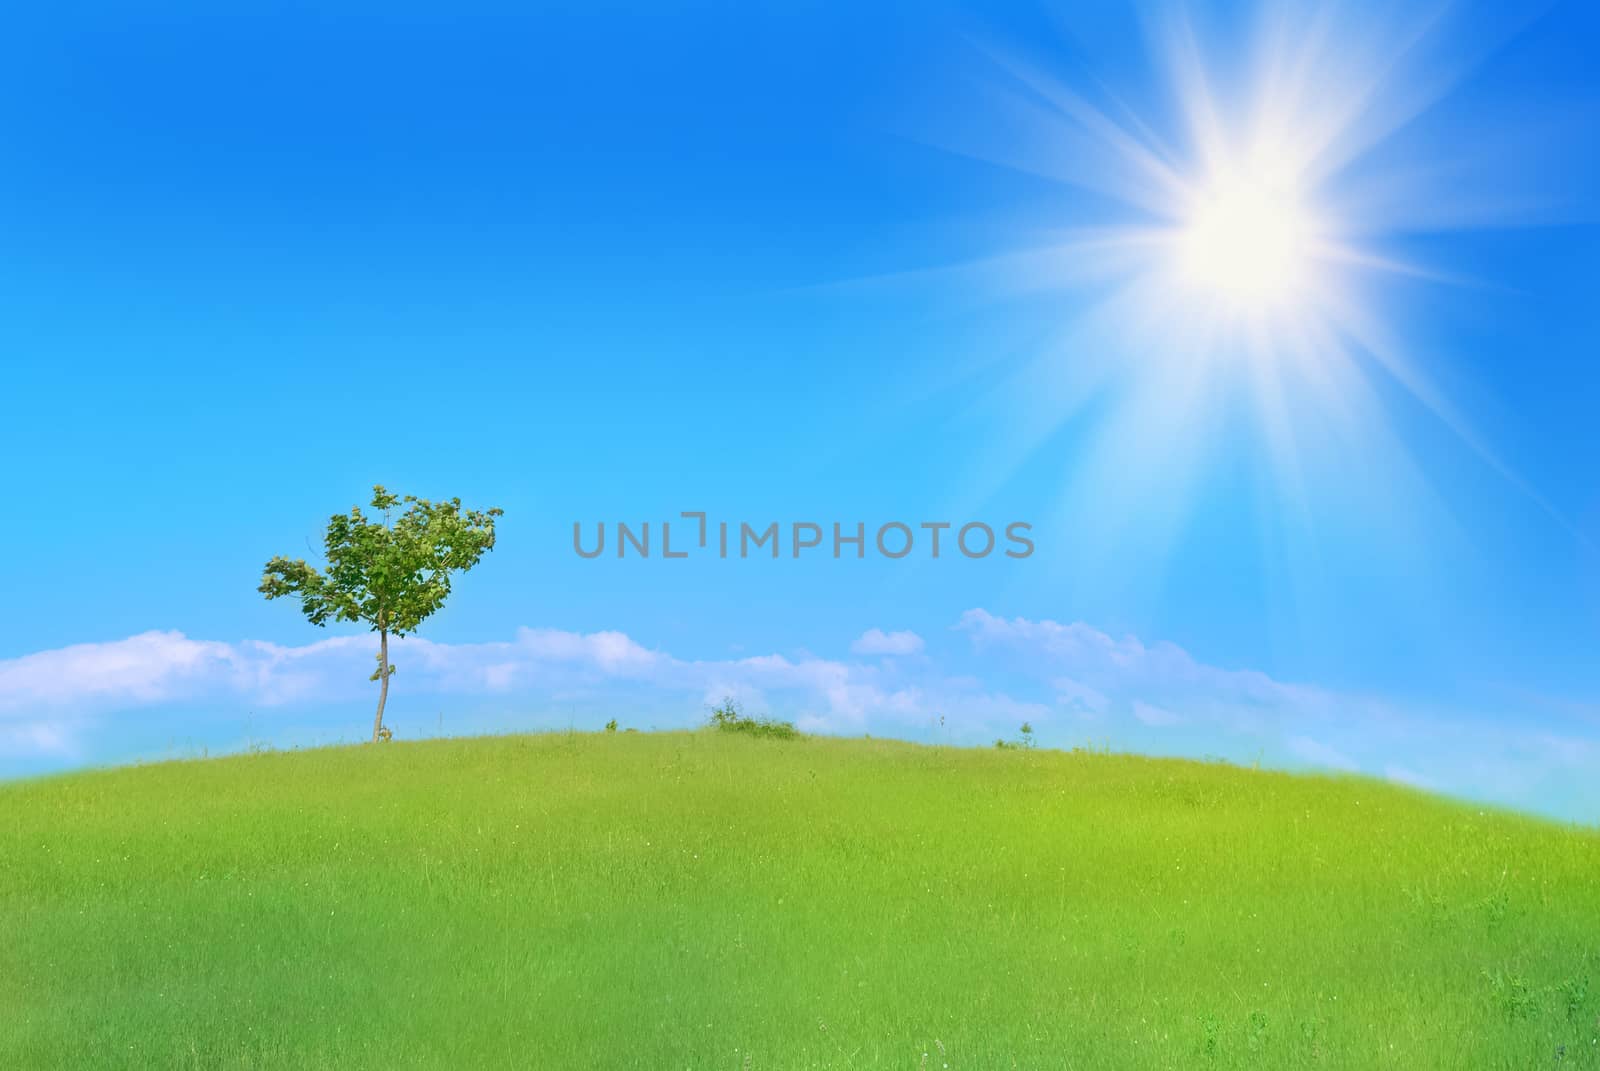 Lonely tree in the field with green grass, blue sky and clouds